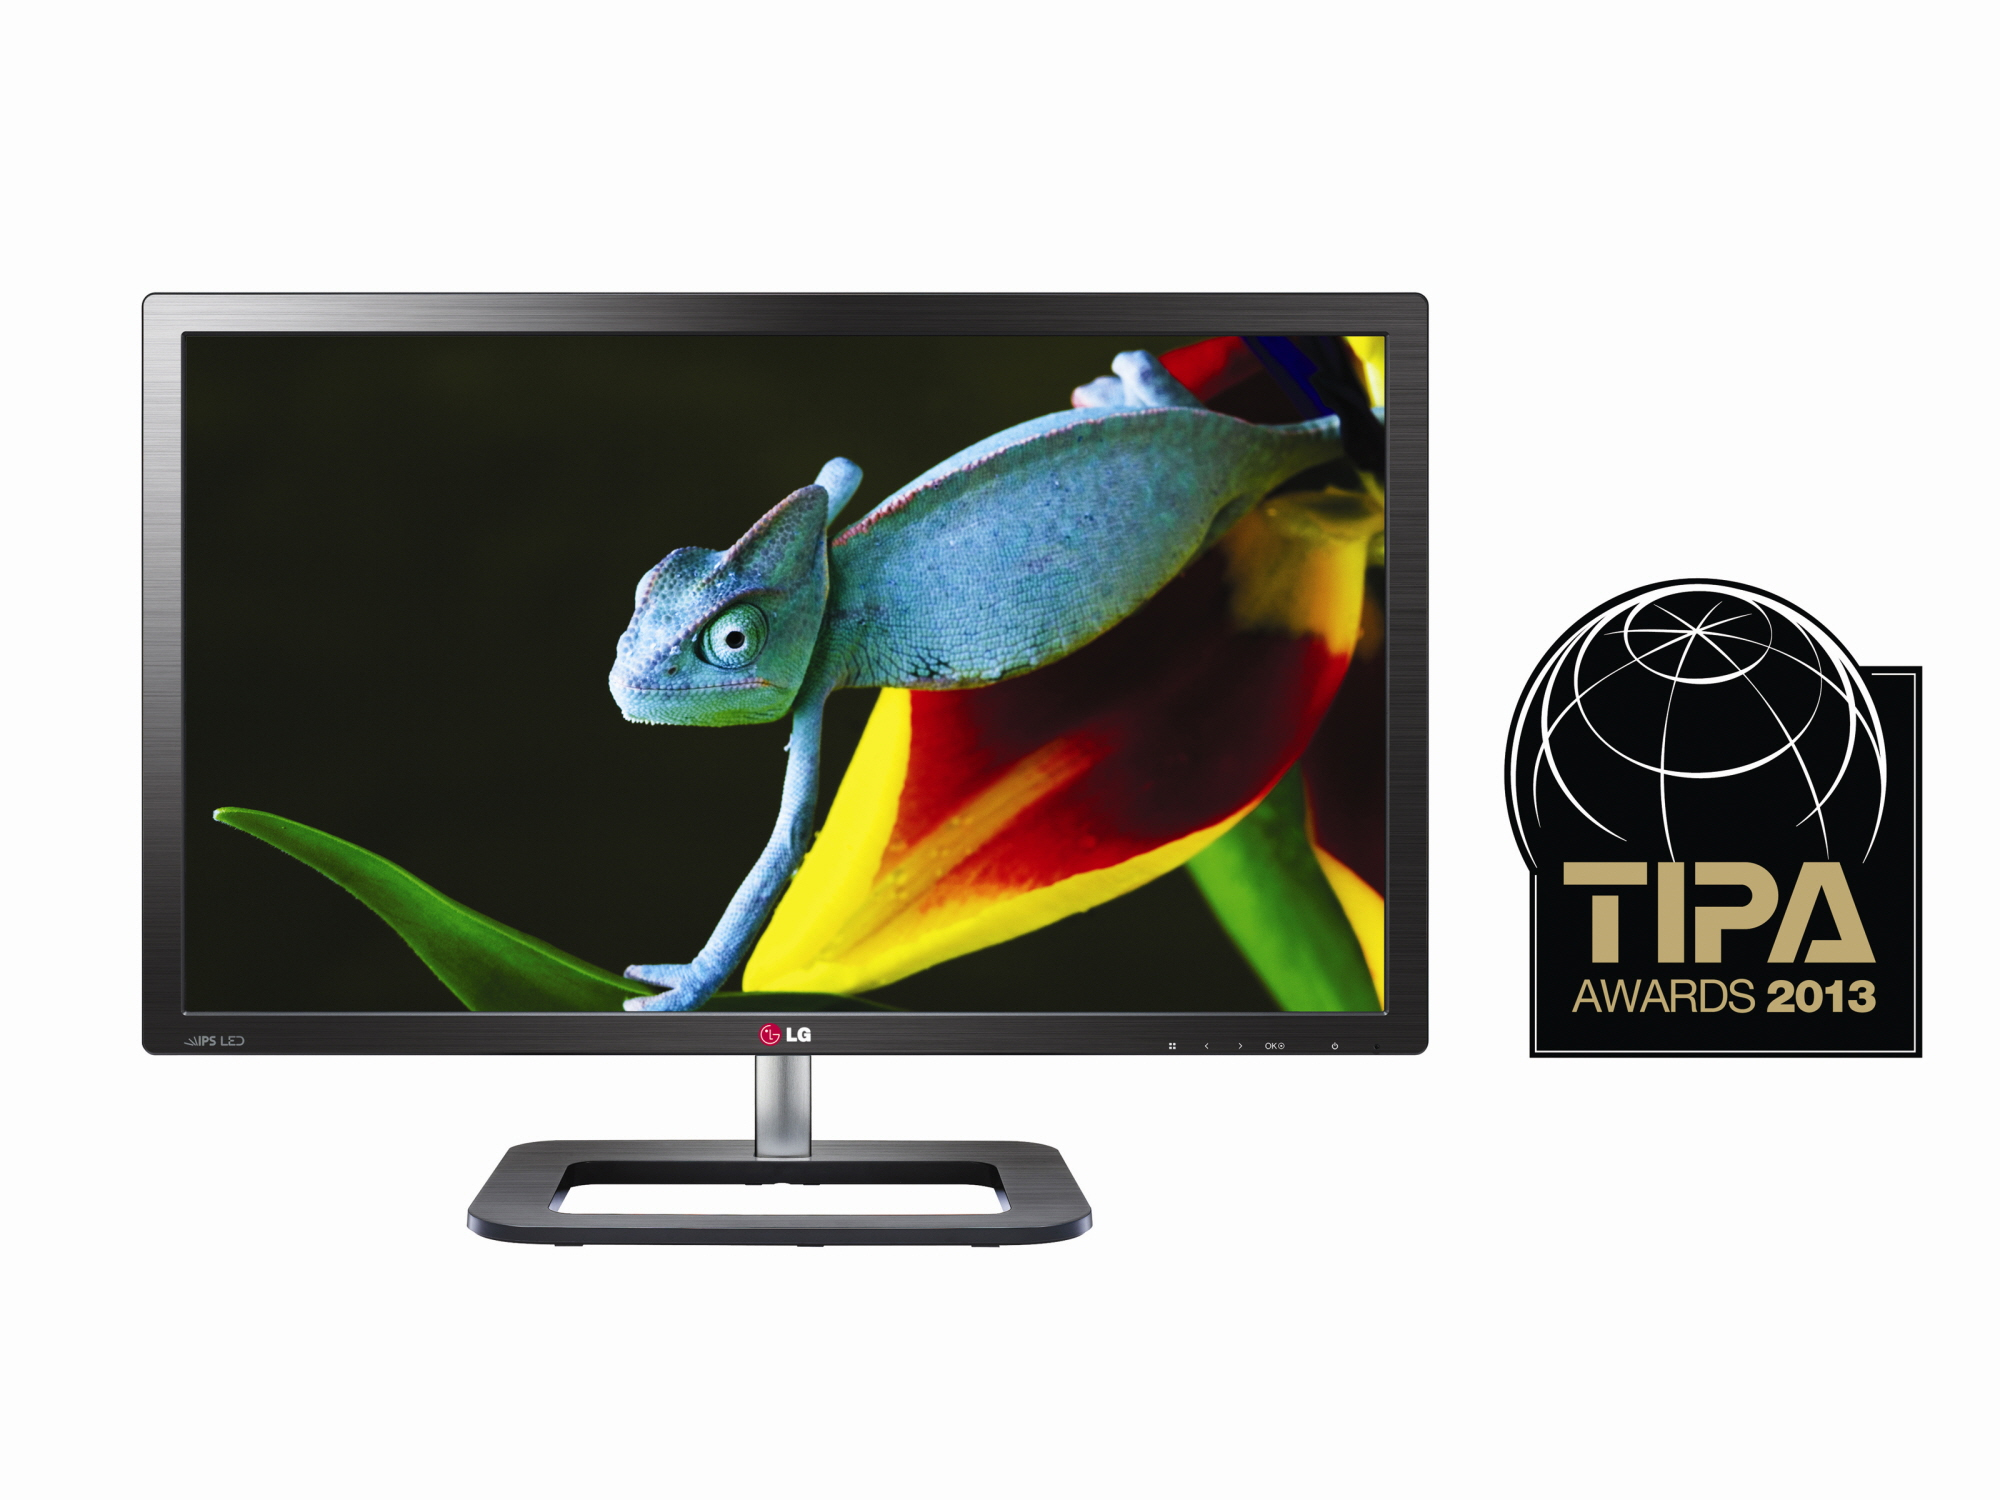 Front view of LG ColorPrime Monitor model 27EA83 with a 2013 TIPA Awards logo on the right side